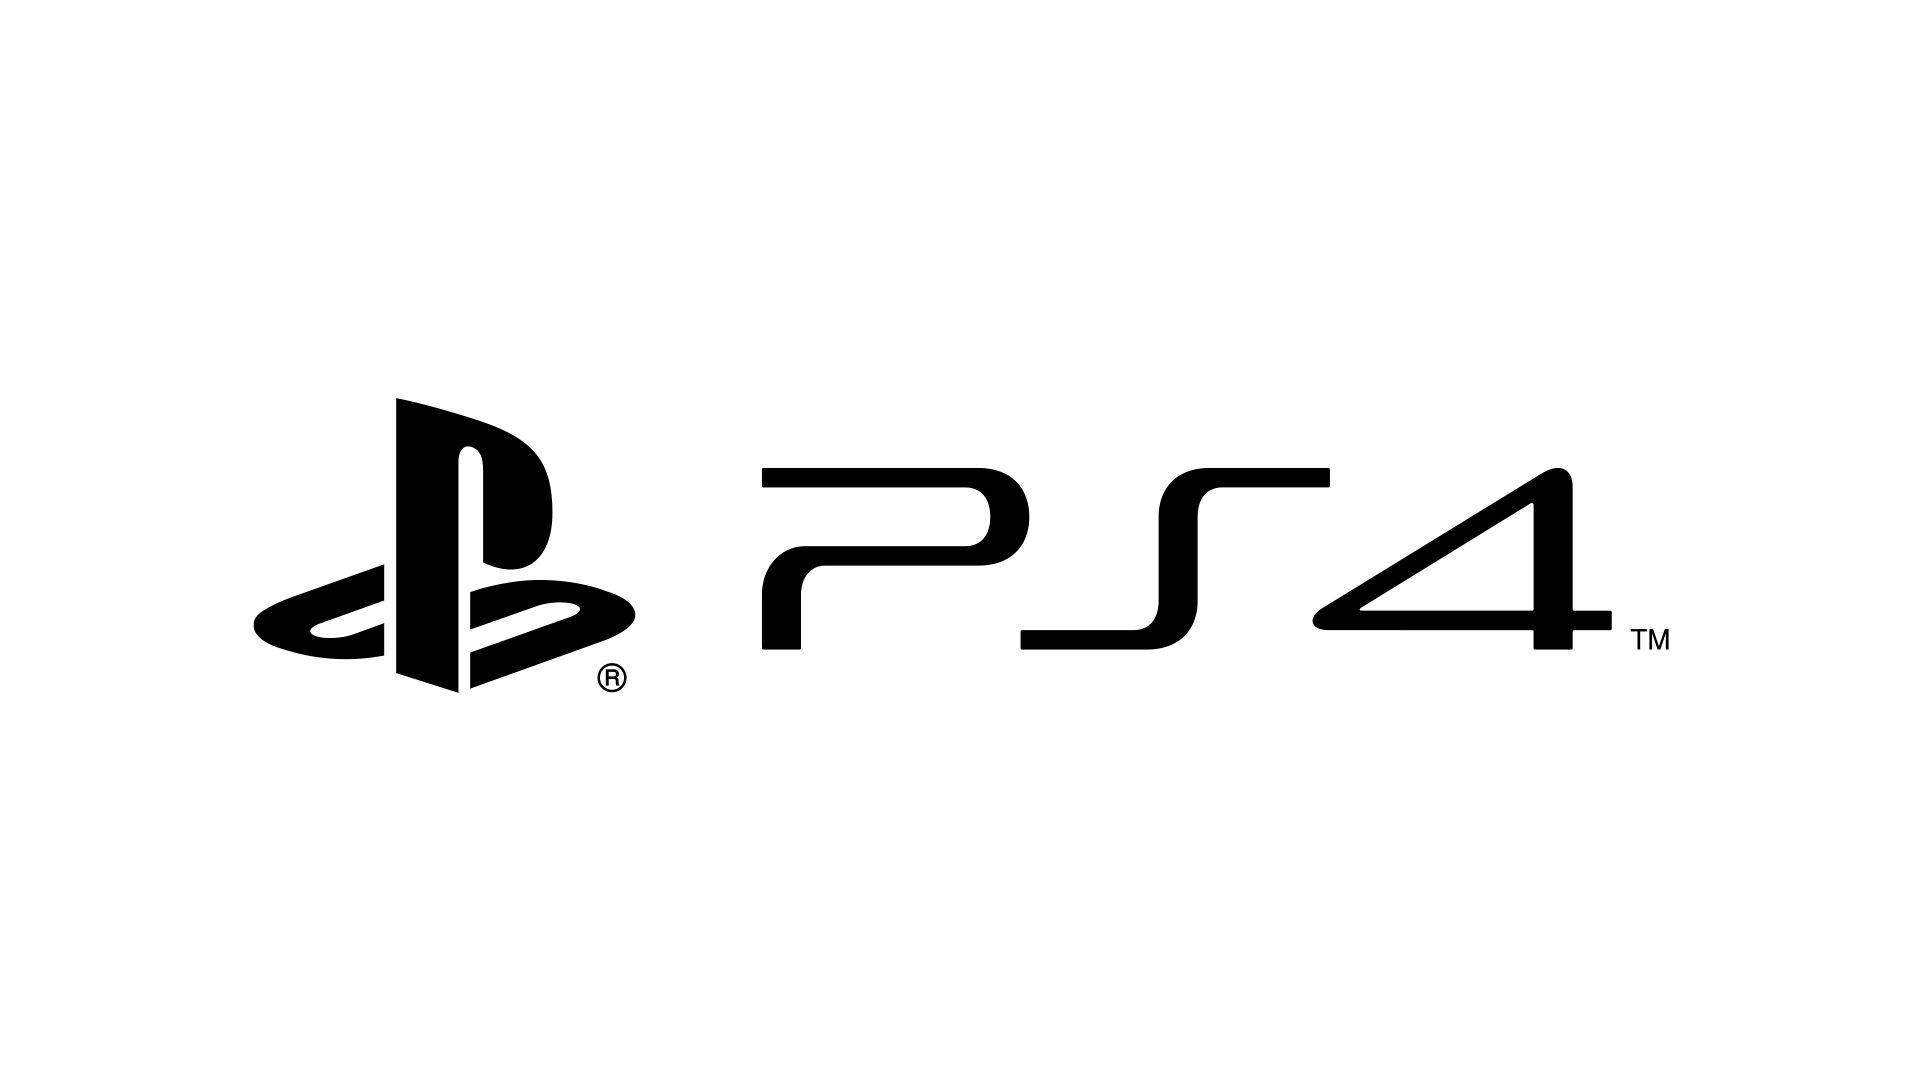 Sony PlayStation 4 Logo - Sony PlayStation 4 Wallpaper, Picture, Image